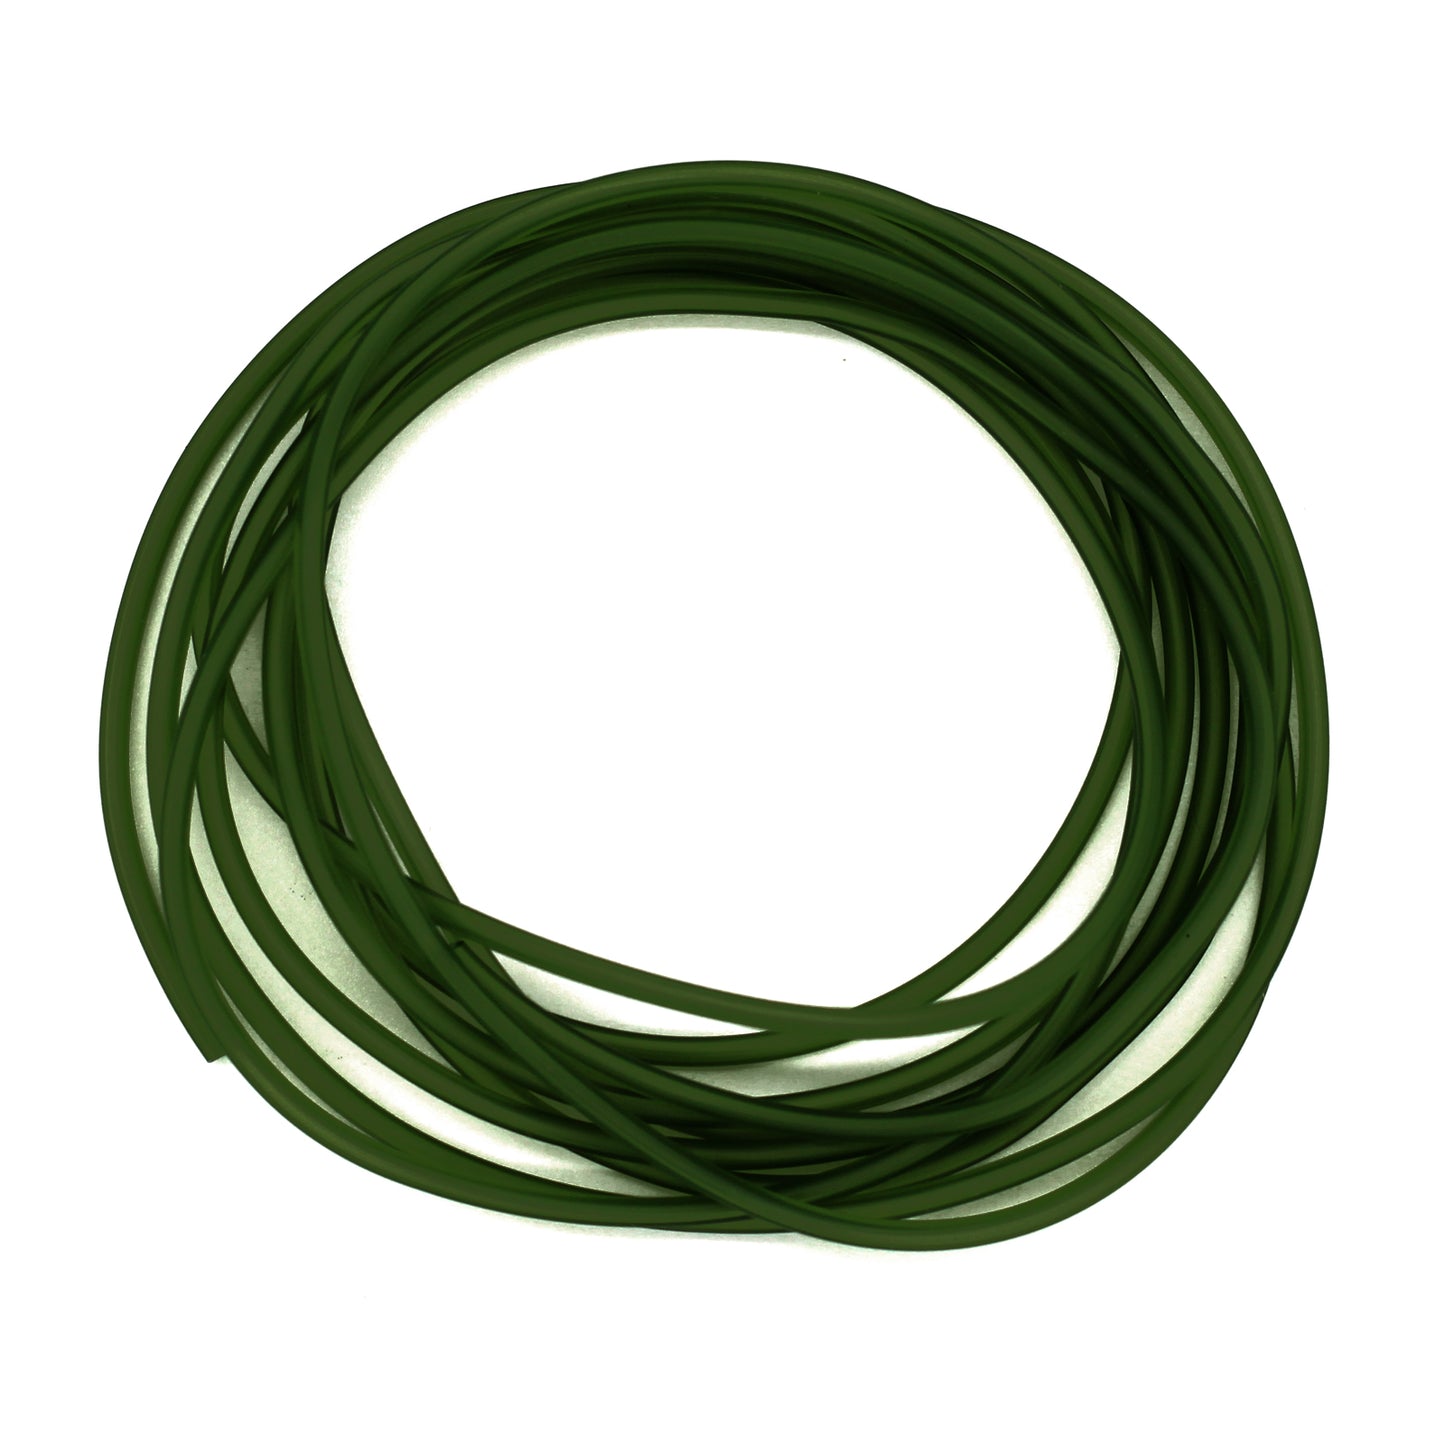 Deception Angling Silicon Tubing for Fishing in Green